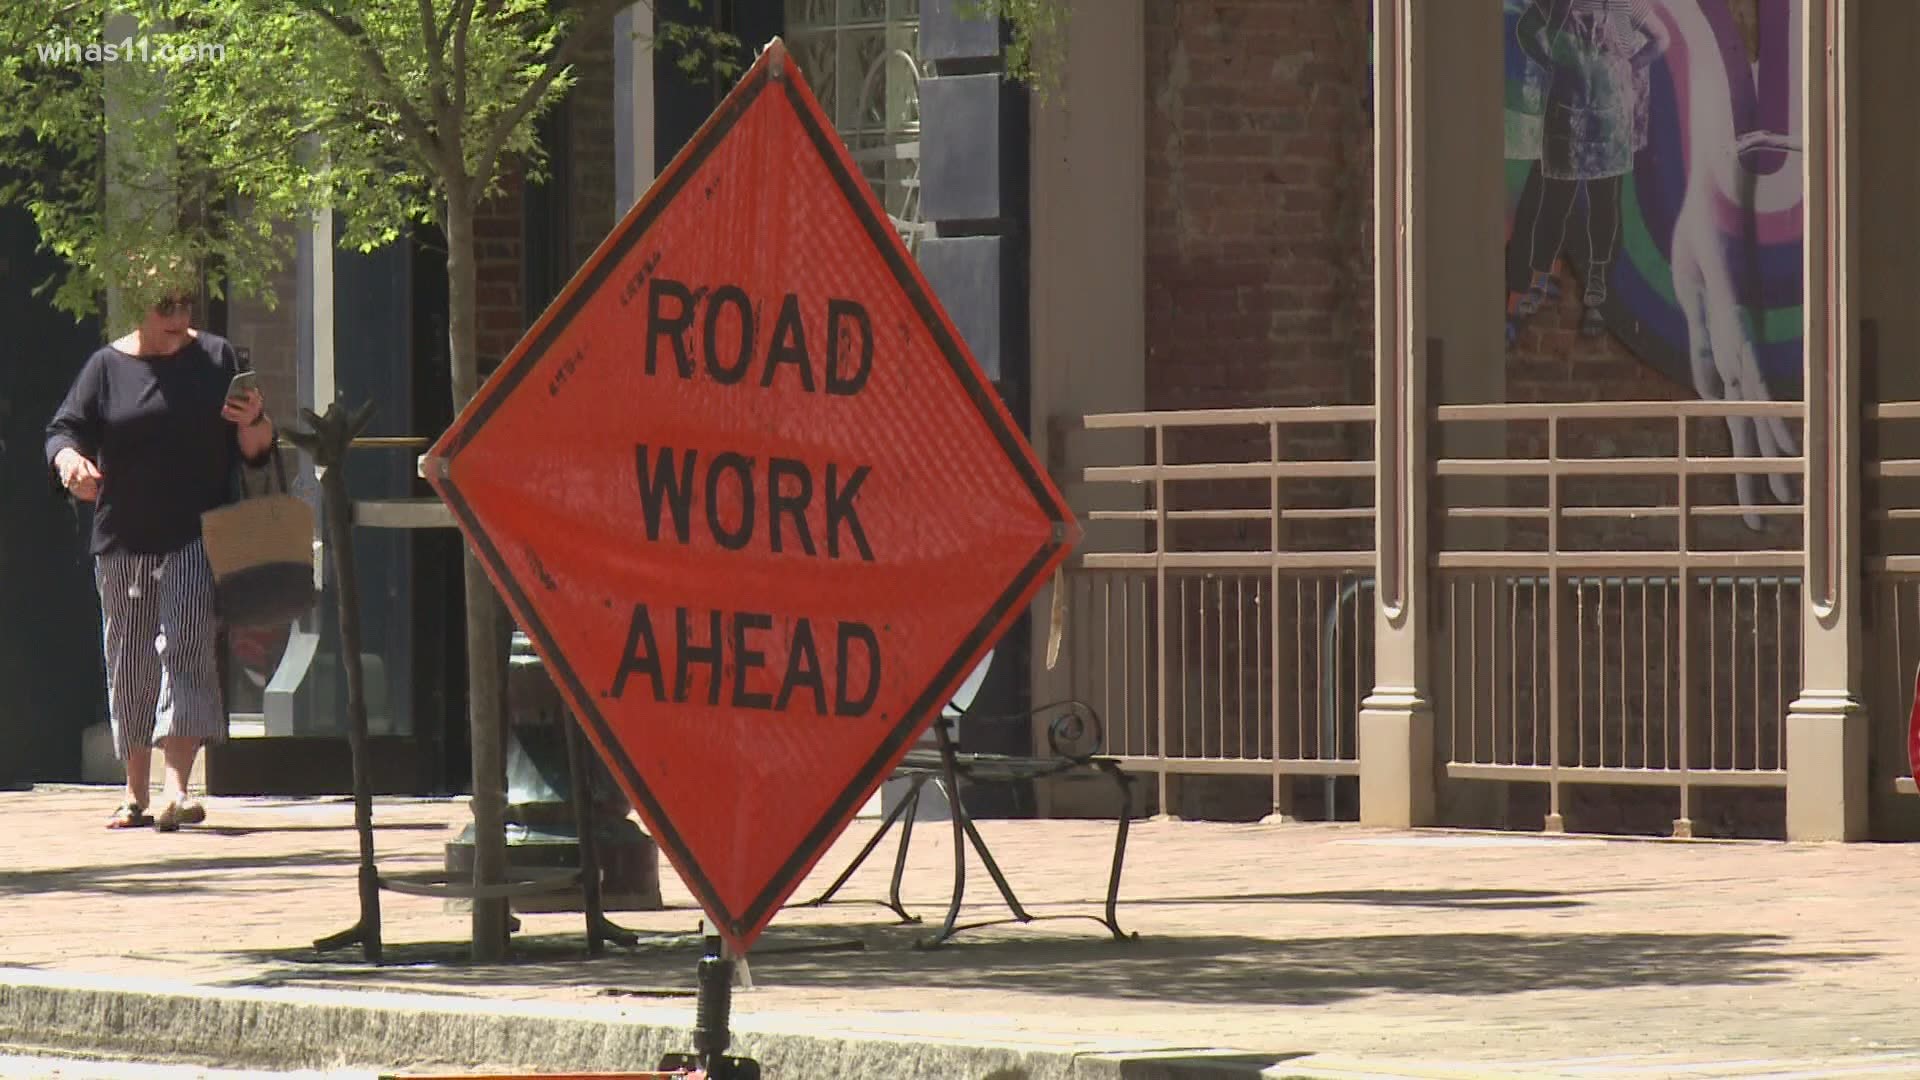 WHAS received complaints about road work on Main St. and we're working to answer your questions. The good news--it could all be over soon!